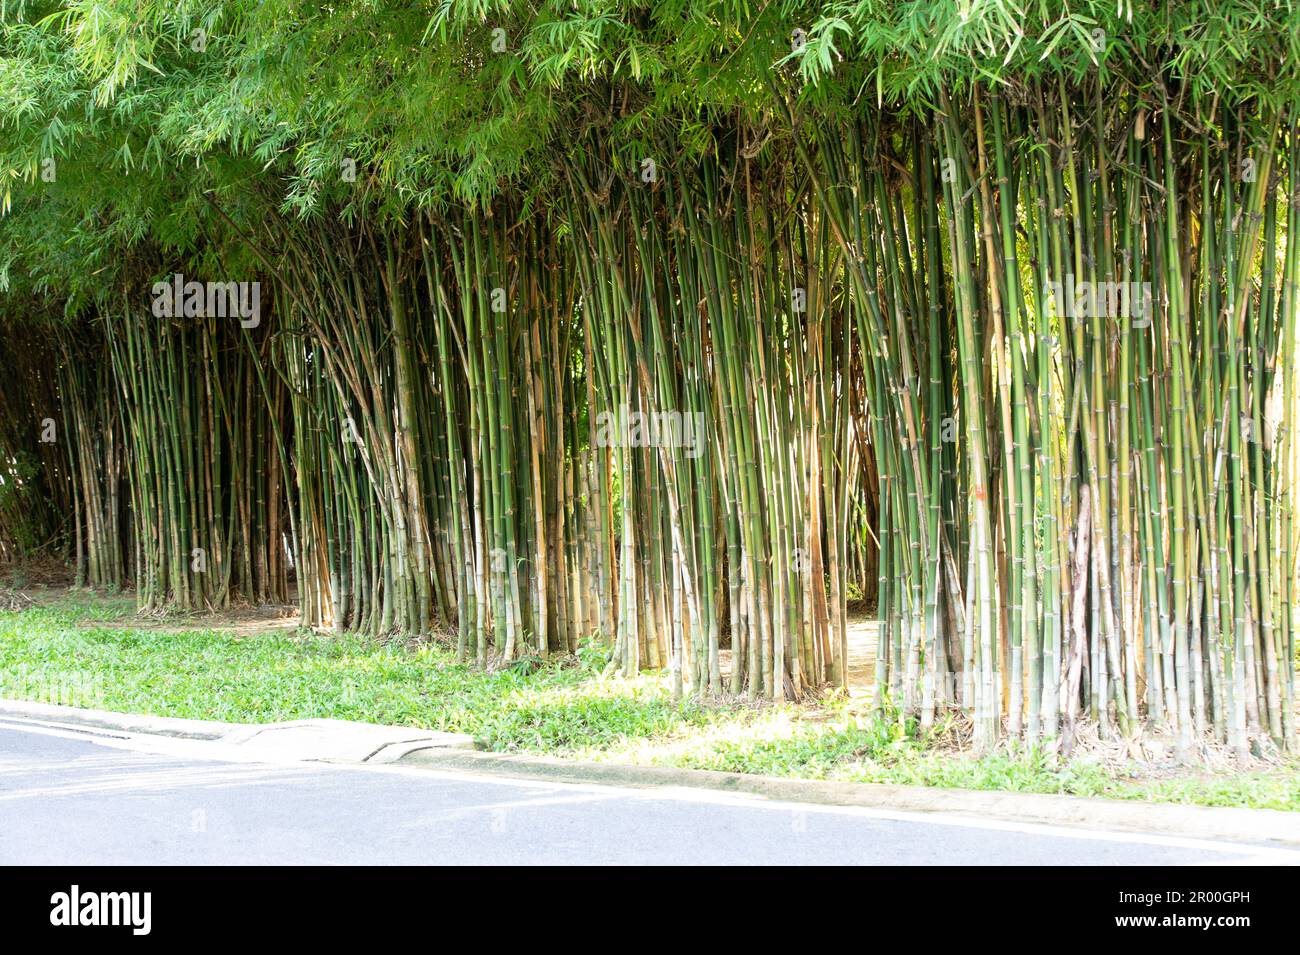 Row of green bamboo trees Walkway with row of bamboo trees in the park. Stock Photo